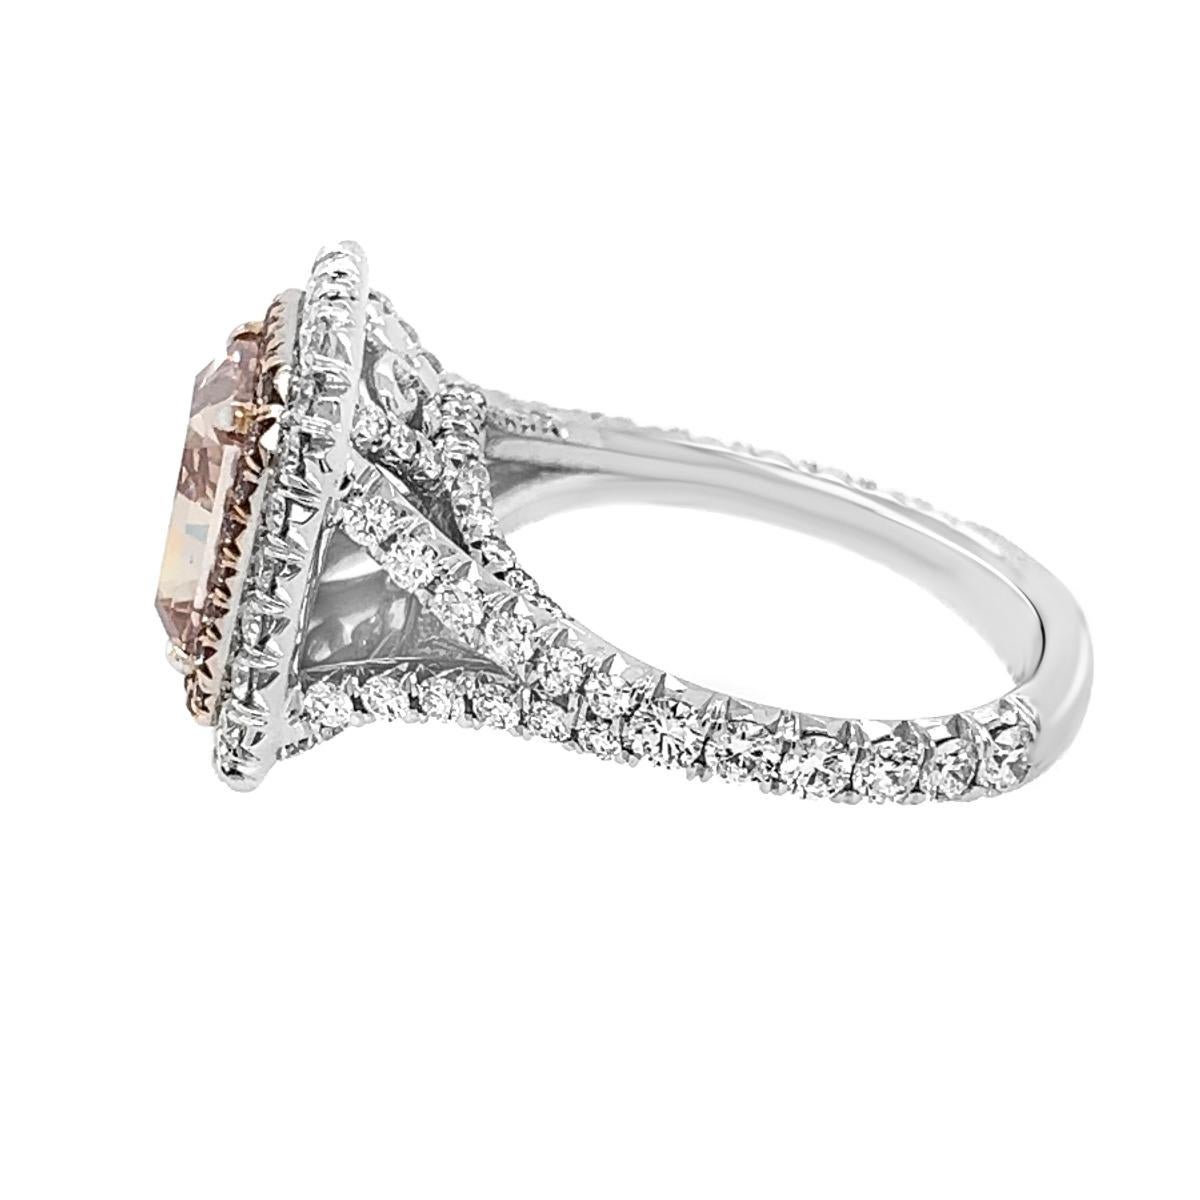 Platinum 2.76 Carat Fancy Intense Orangey Pink Diamond Ring In New Condition For Sale In New York, NY